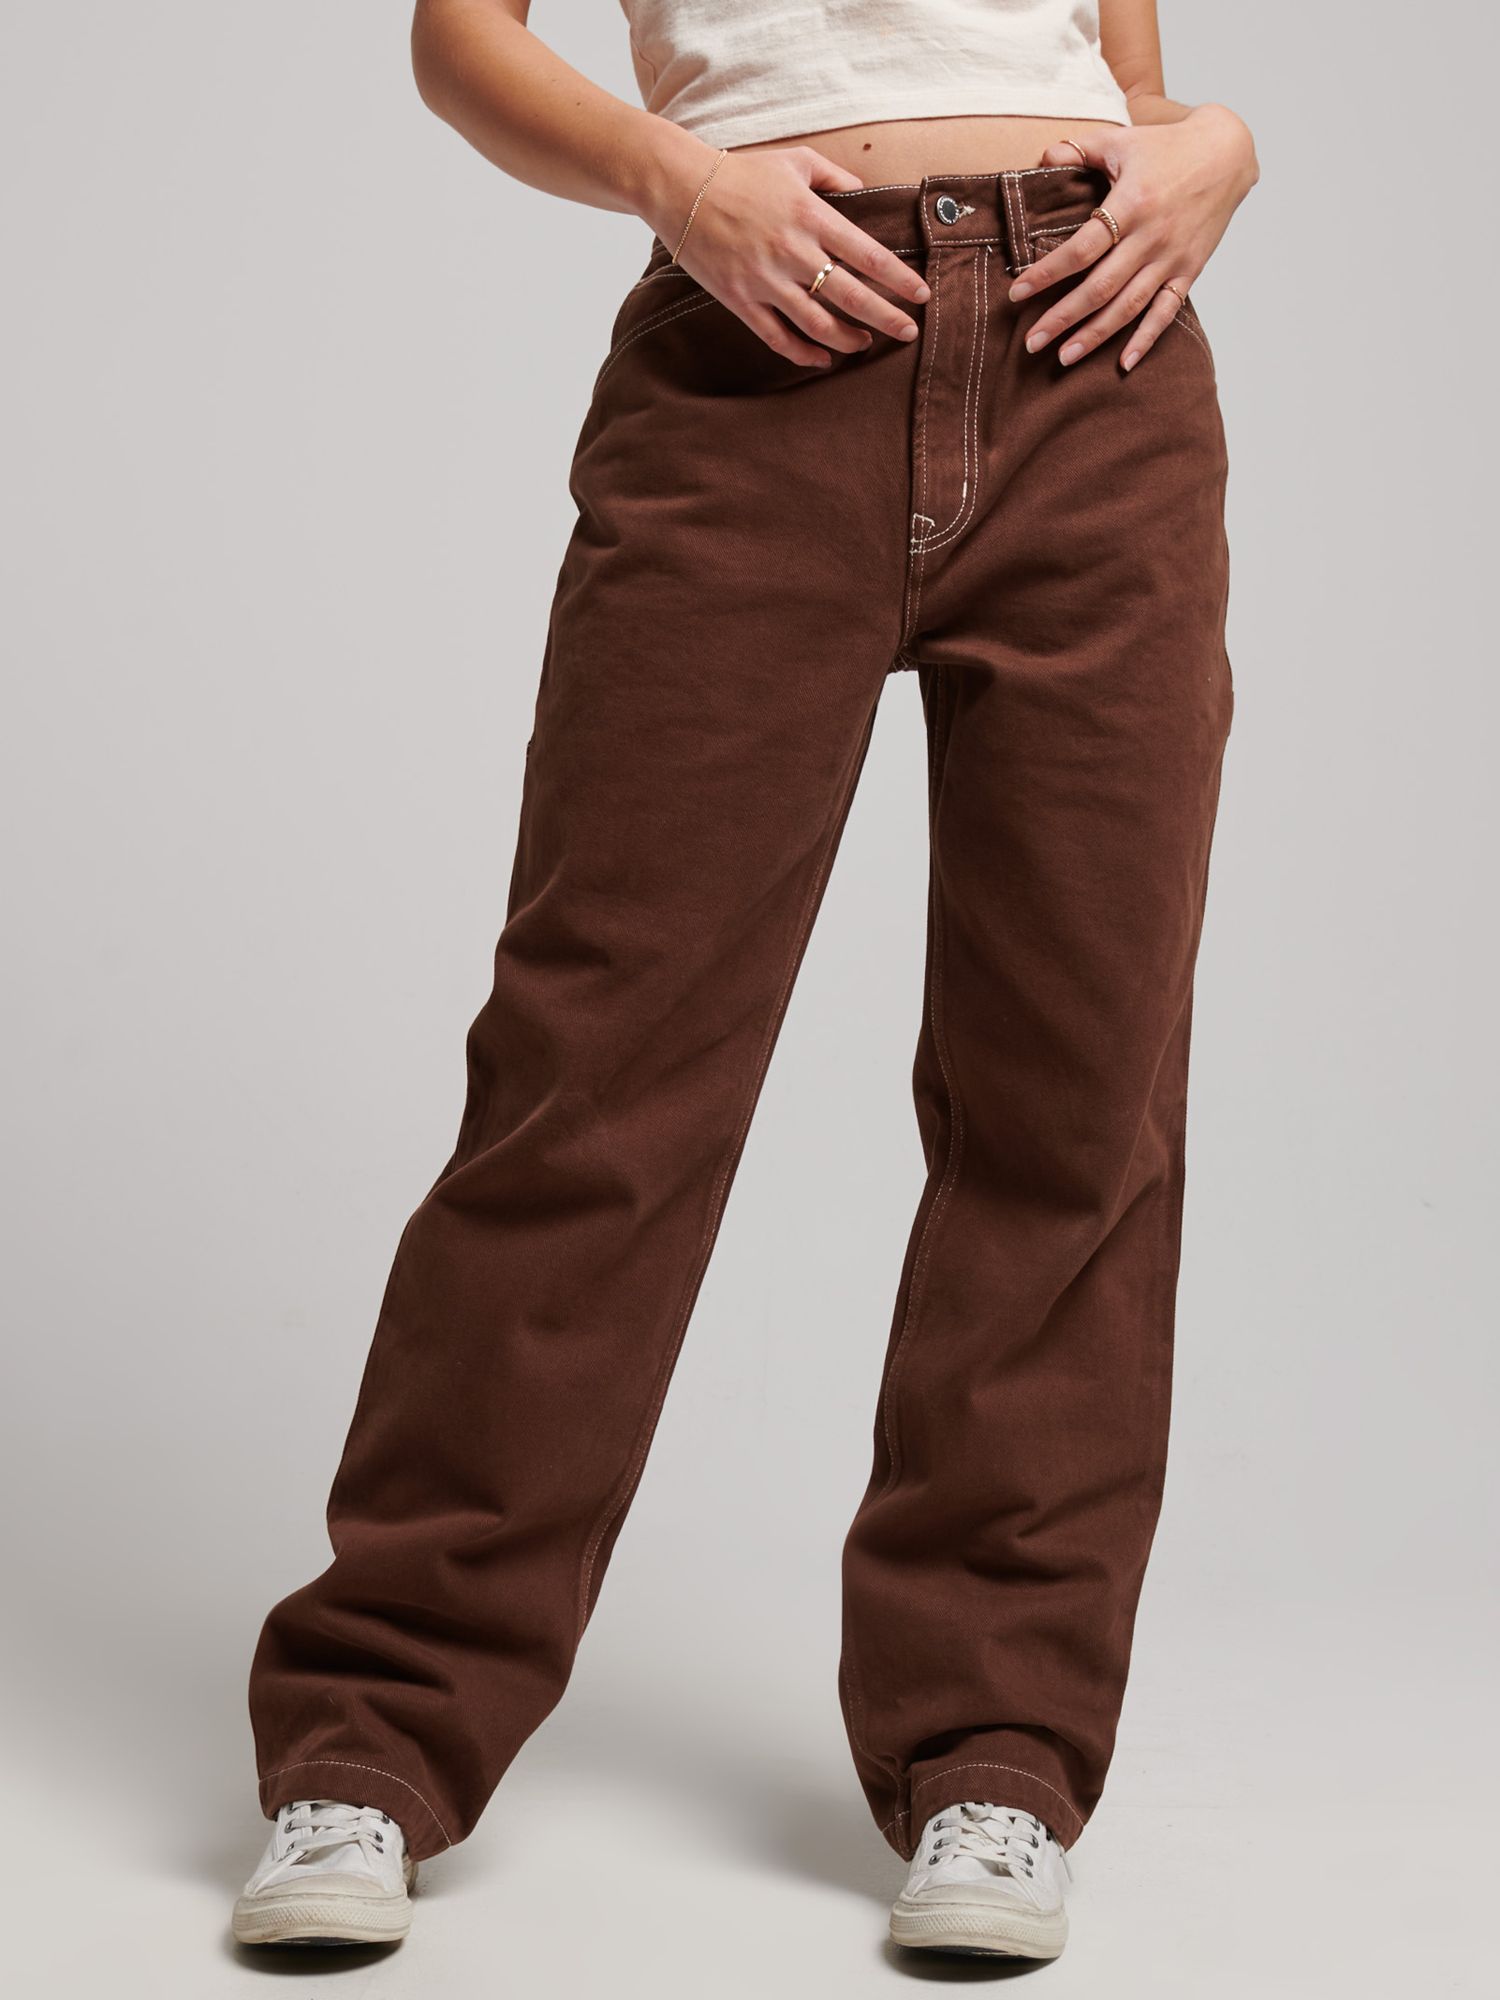 Thermal Skinny Outdoor Trousers - Espresso